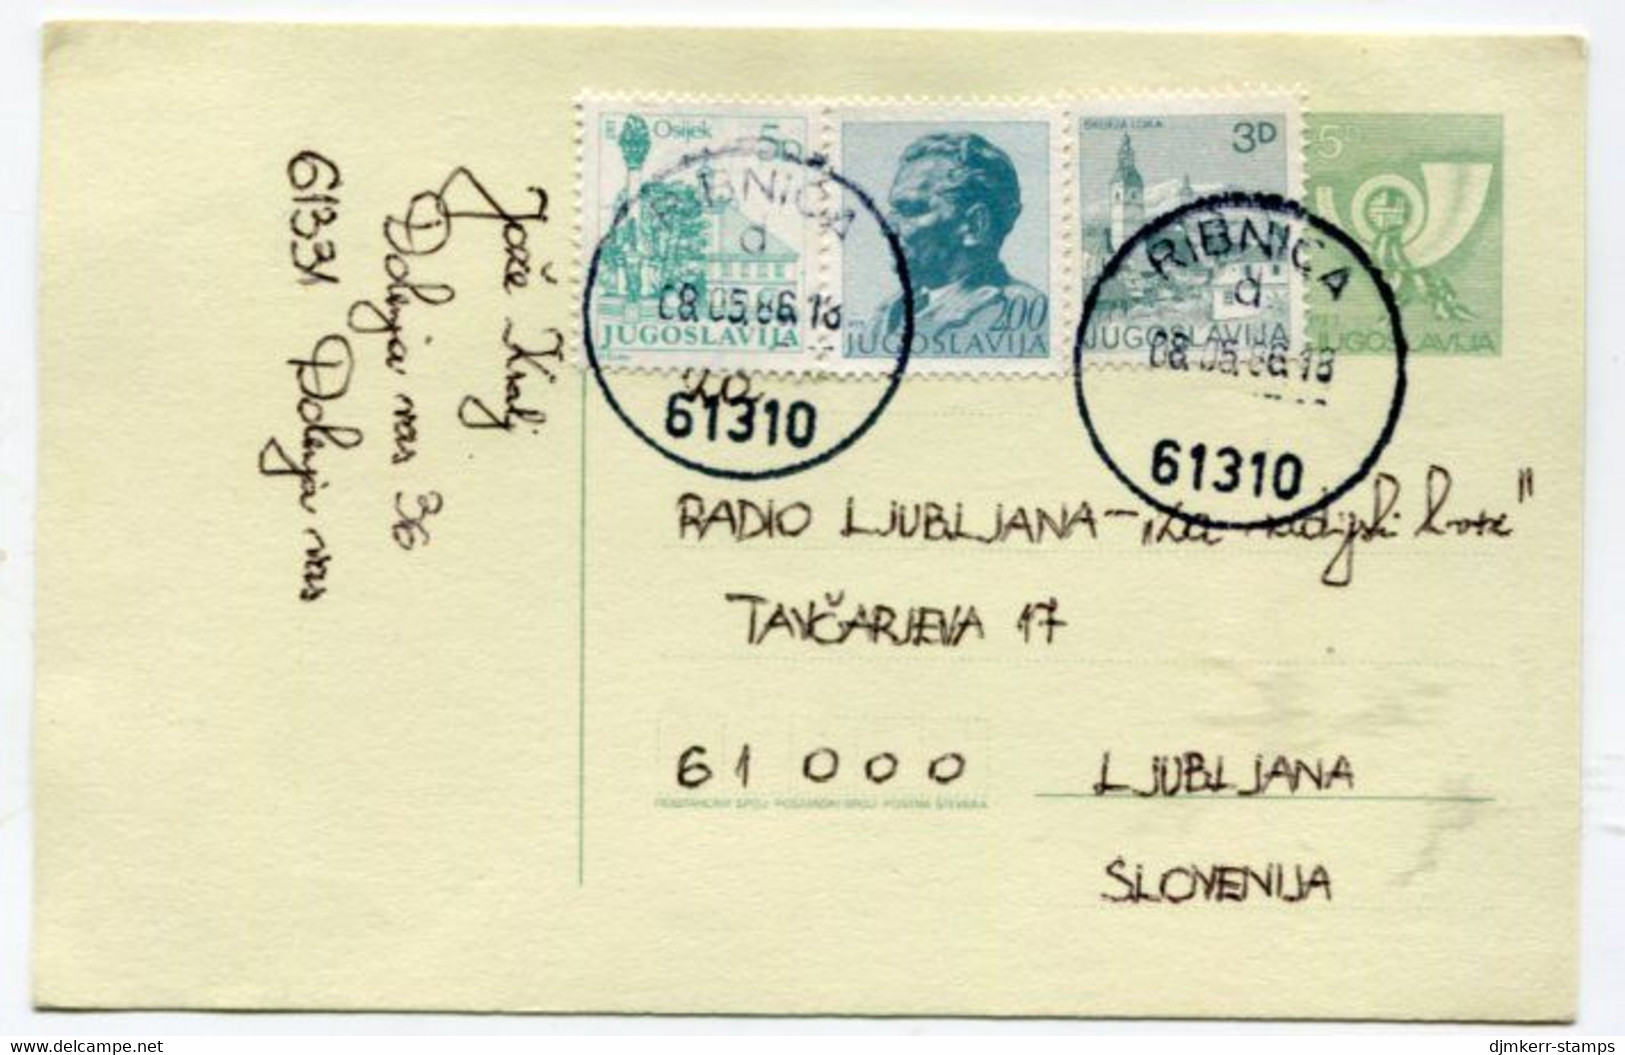 YUGOSLAVIA 1984 Posthorn 5 D. Stationery Card Used With Additional Franking.  Michel  P185 - Postal Stationery